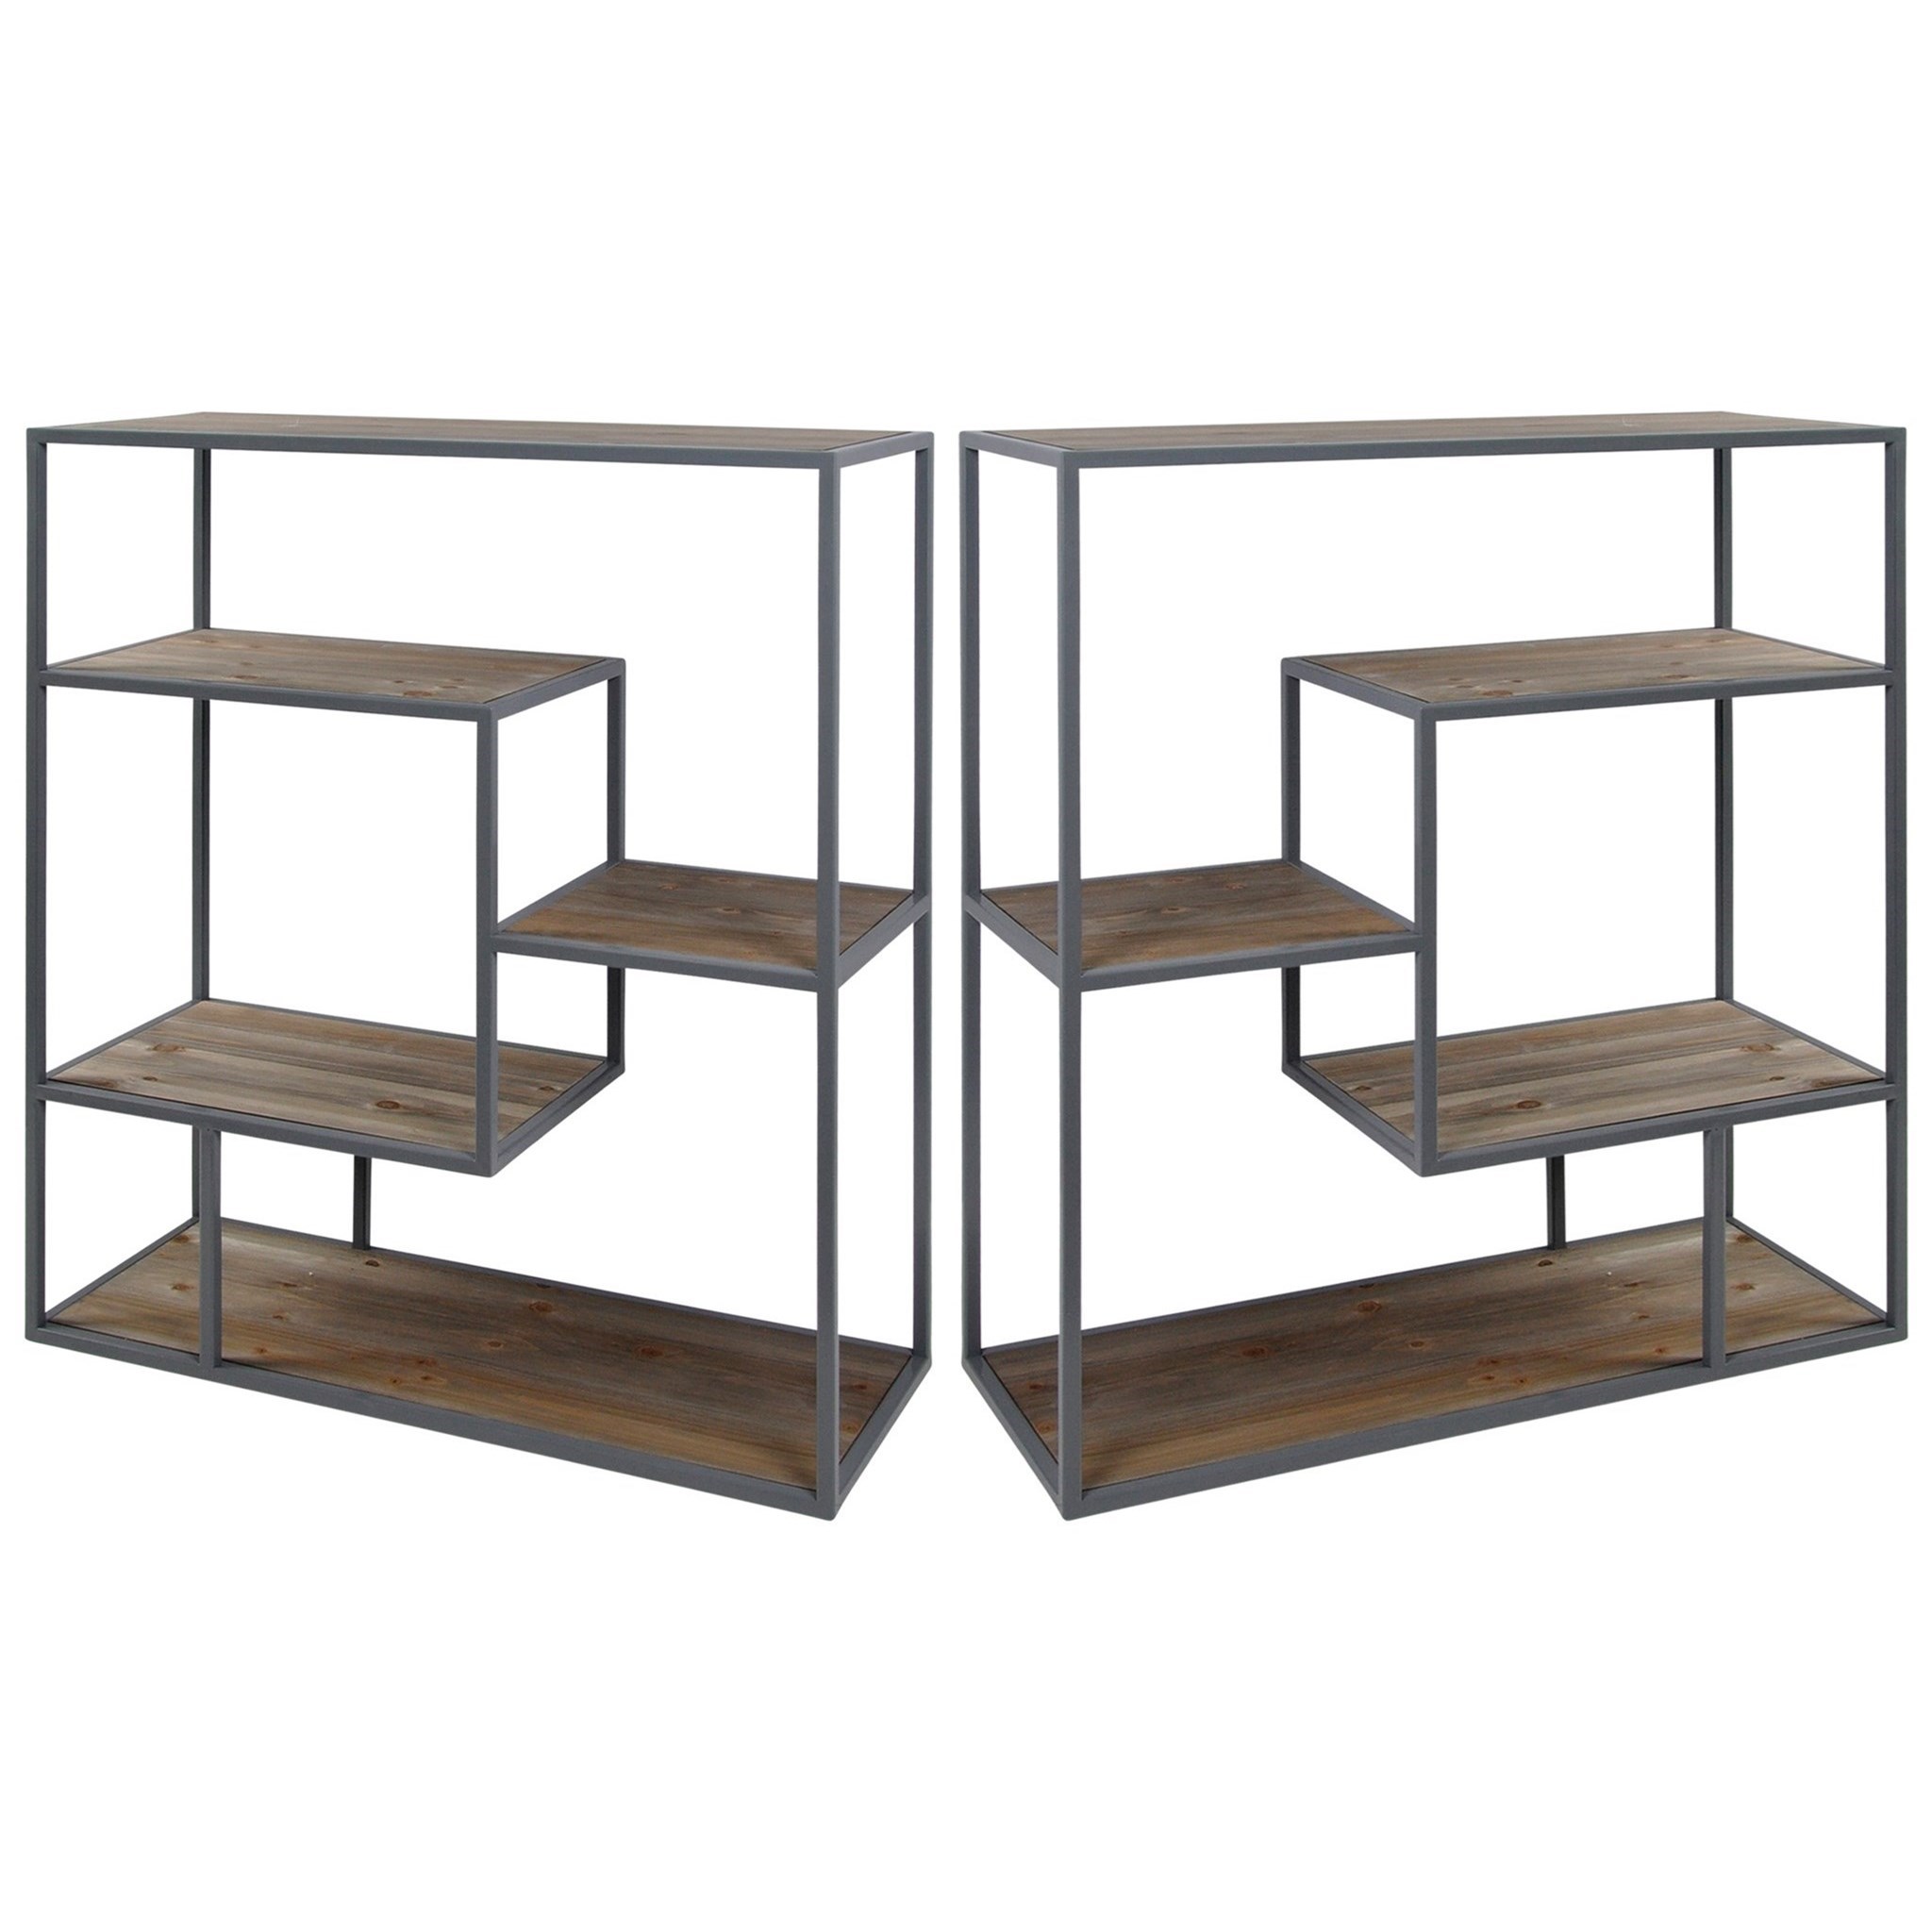 Bryan Keith Brand - Set of 2 Book Cases